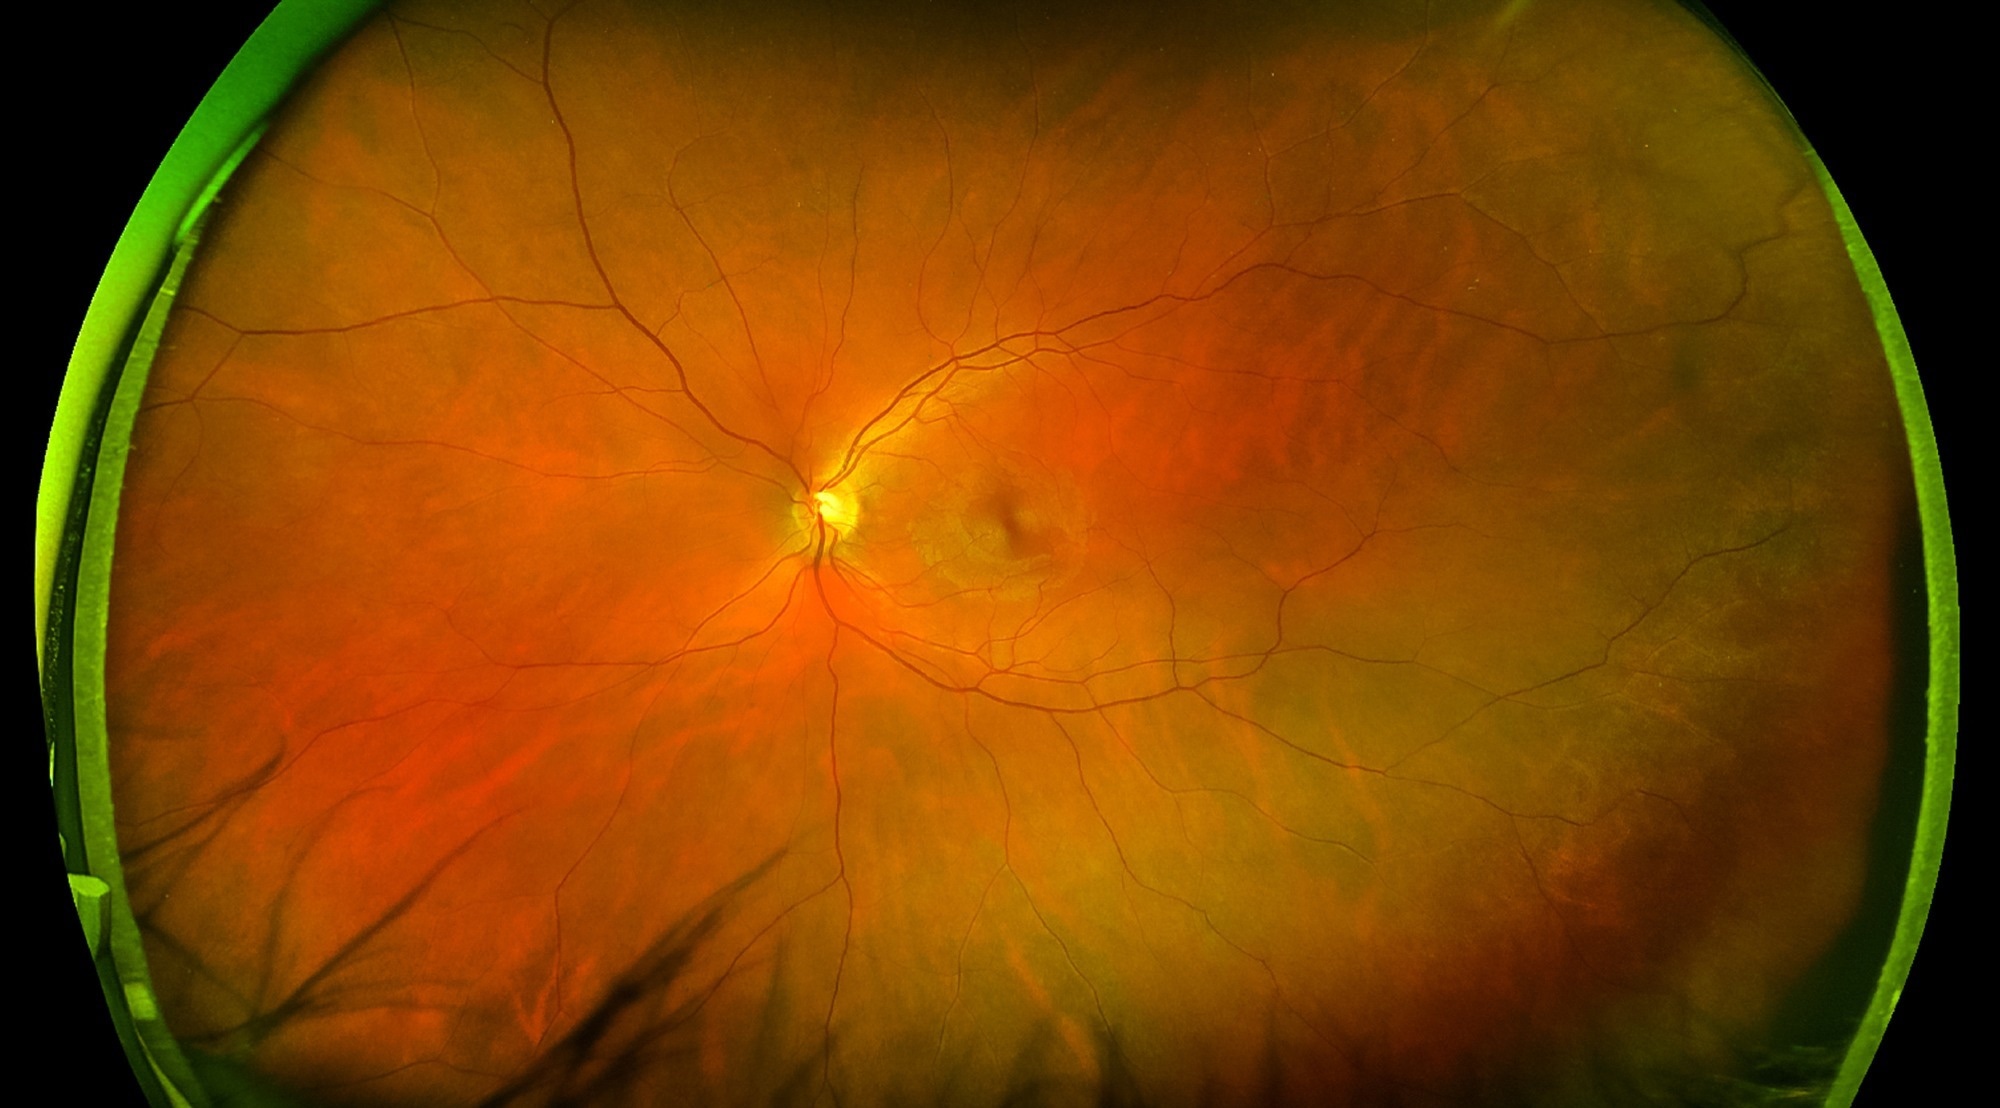 Study: Development of Deep Ensembles to Screen for Autism and Symptom Severity Using Retinal Photographs. Image Credit: yogenystocker / Shutterstock